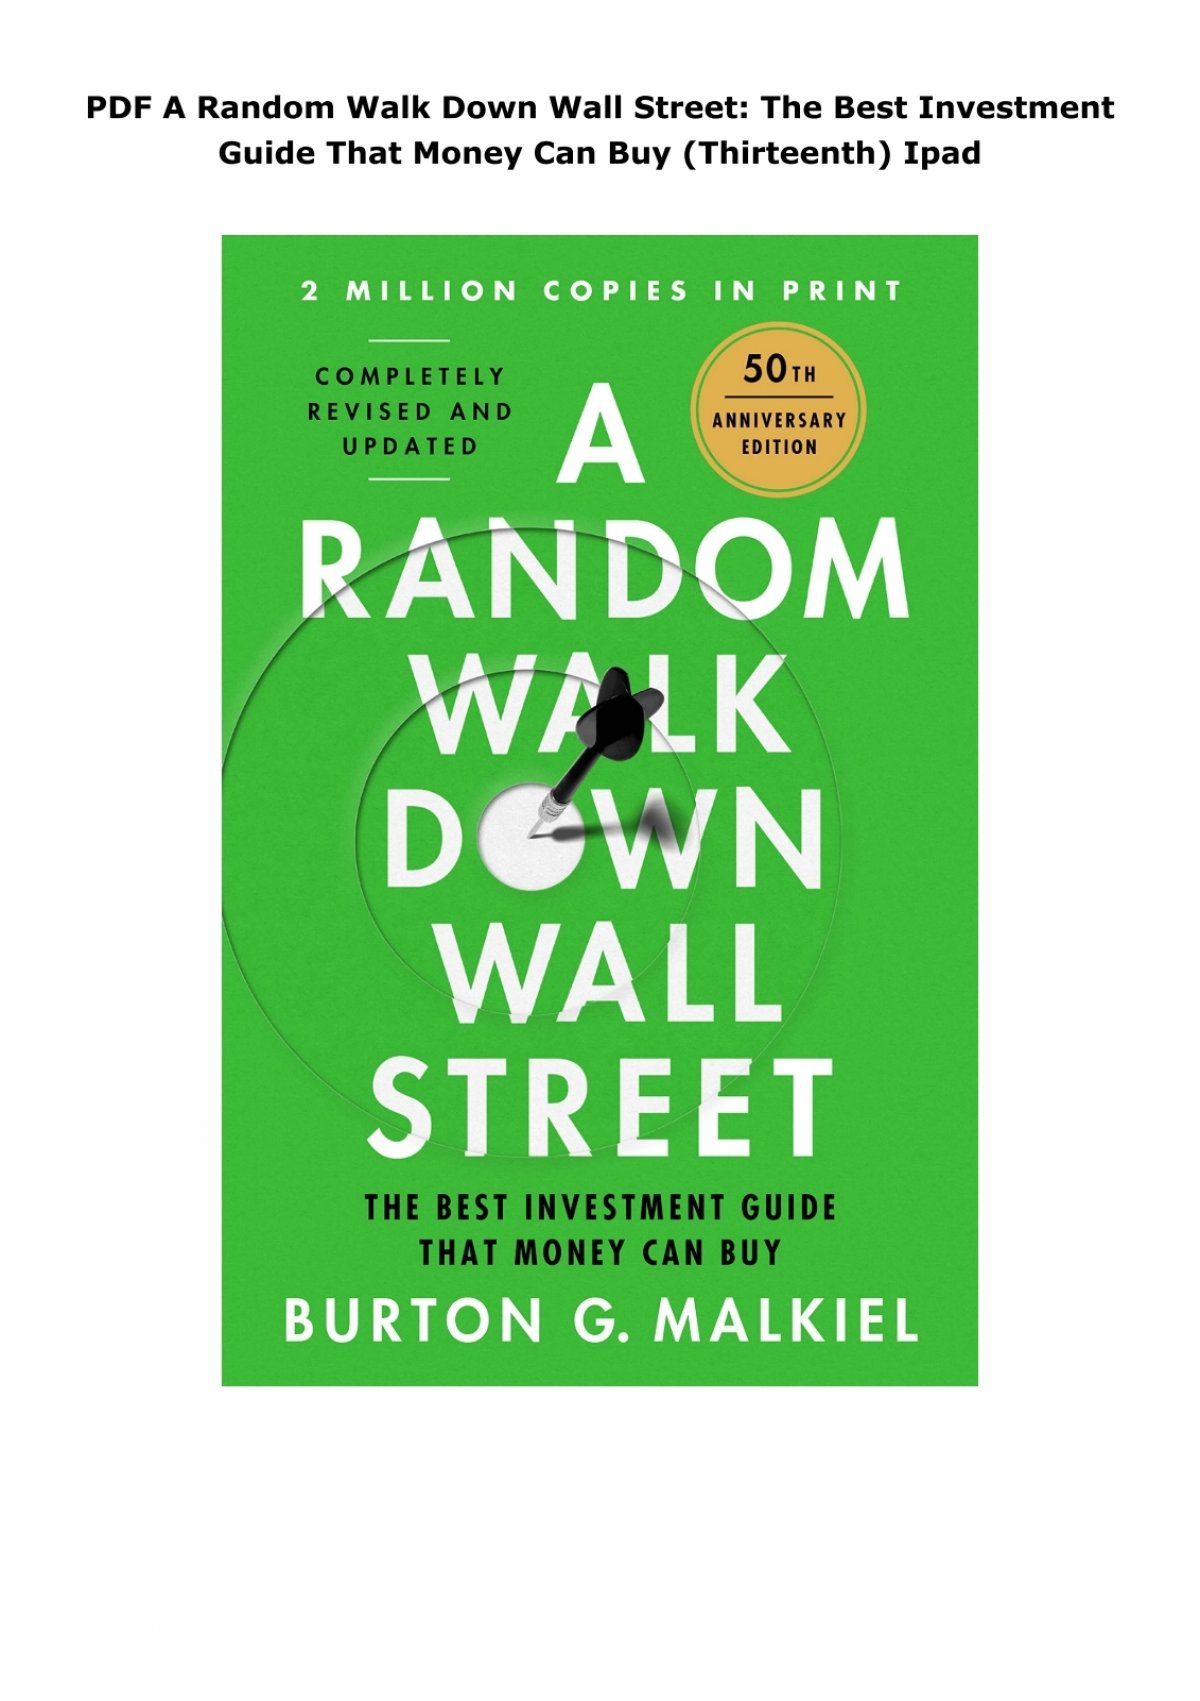 PDF A Random Walk Down Wall Street: The Best Investment Guide That Money  Can Buy (Thirteenth) Ipad